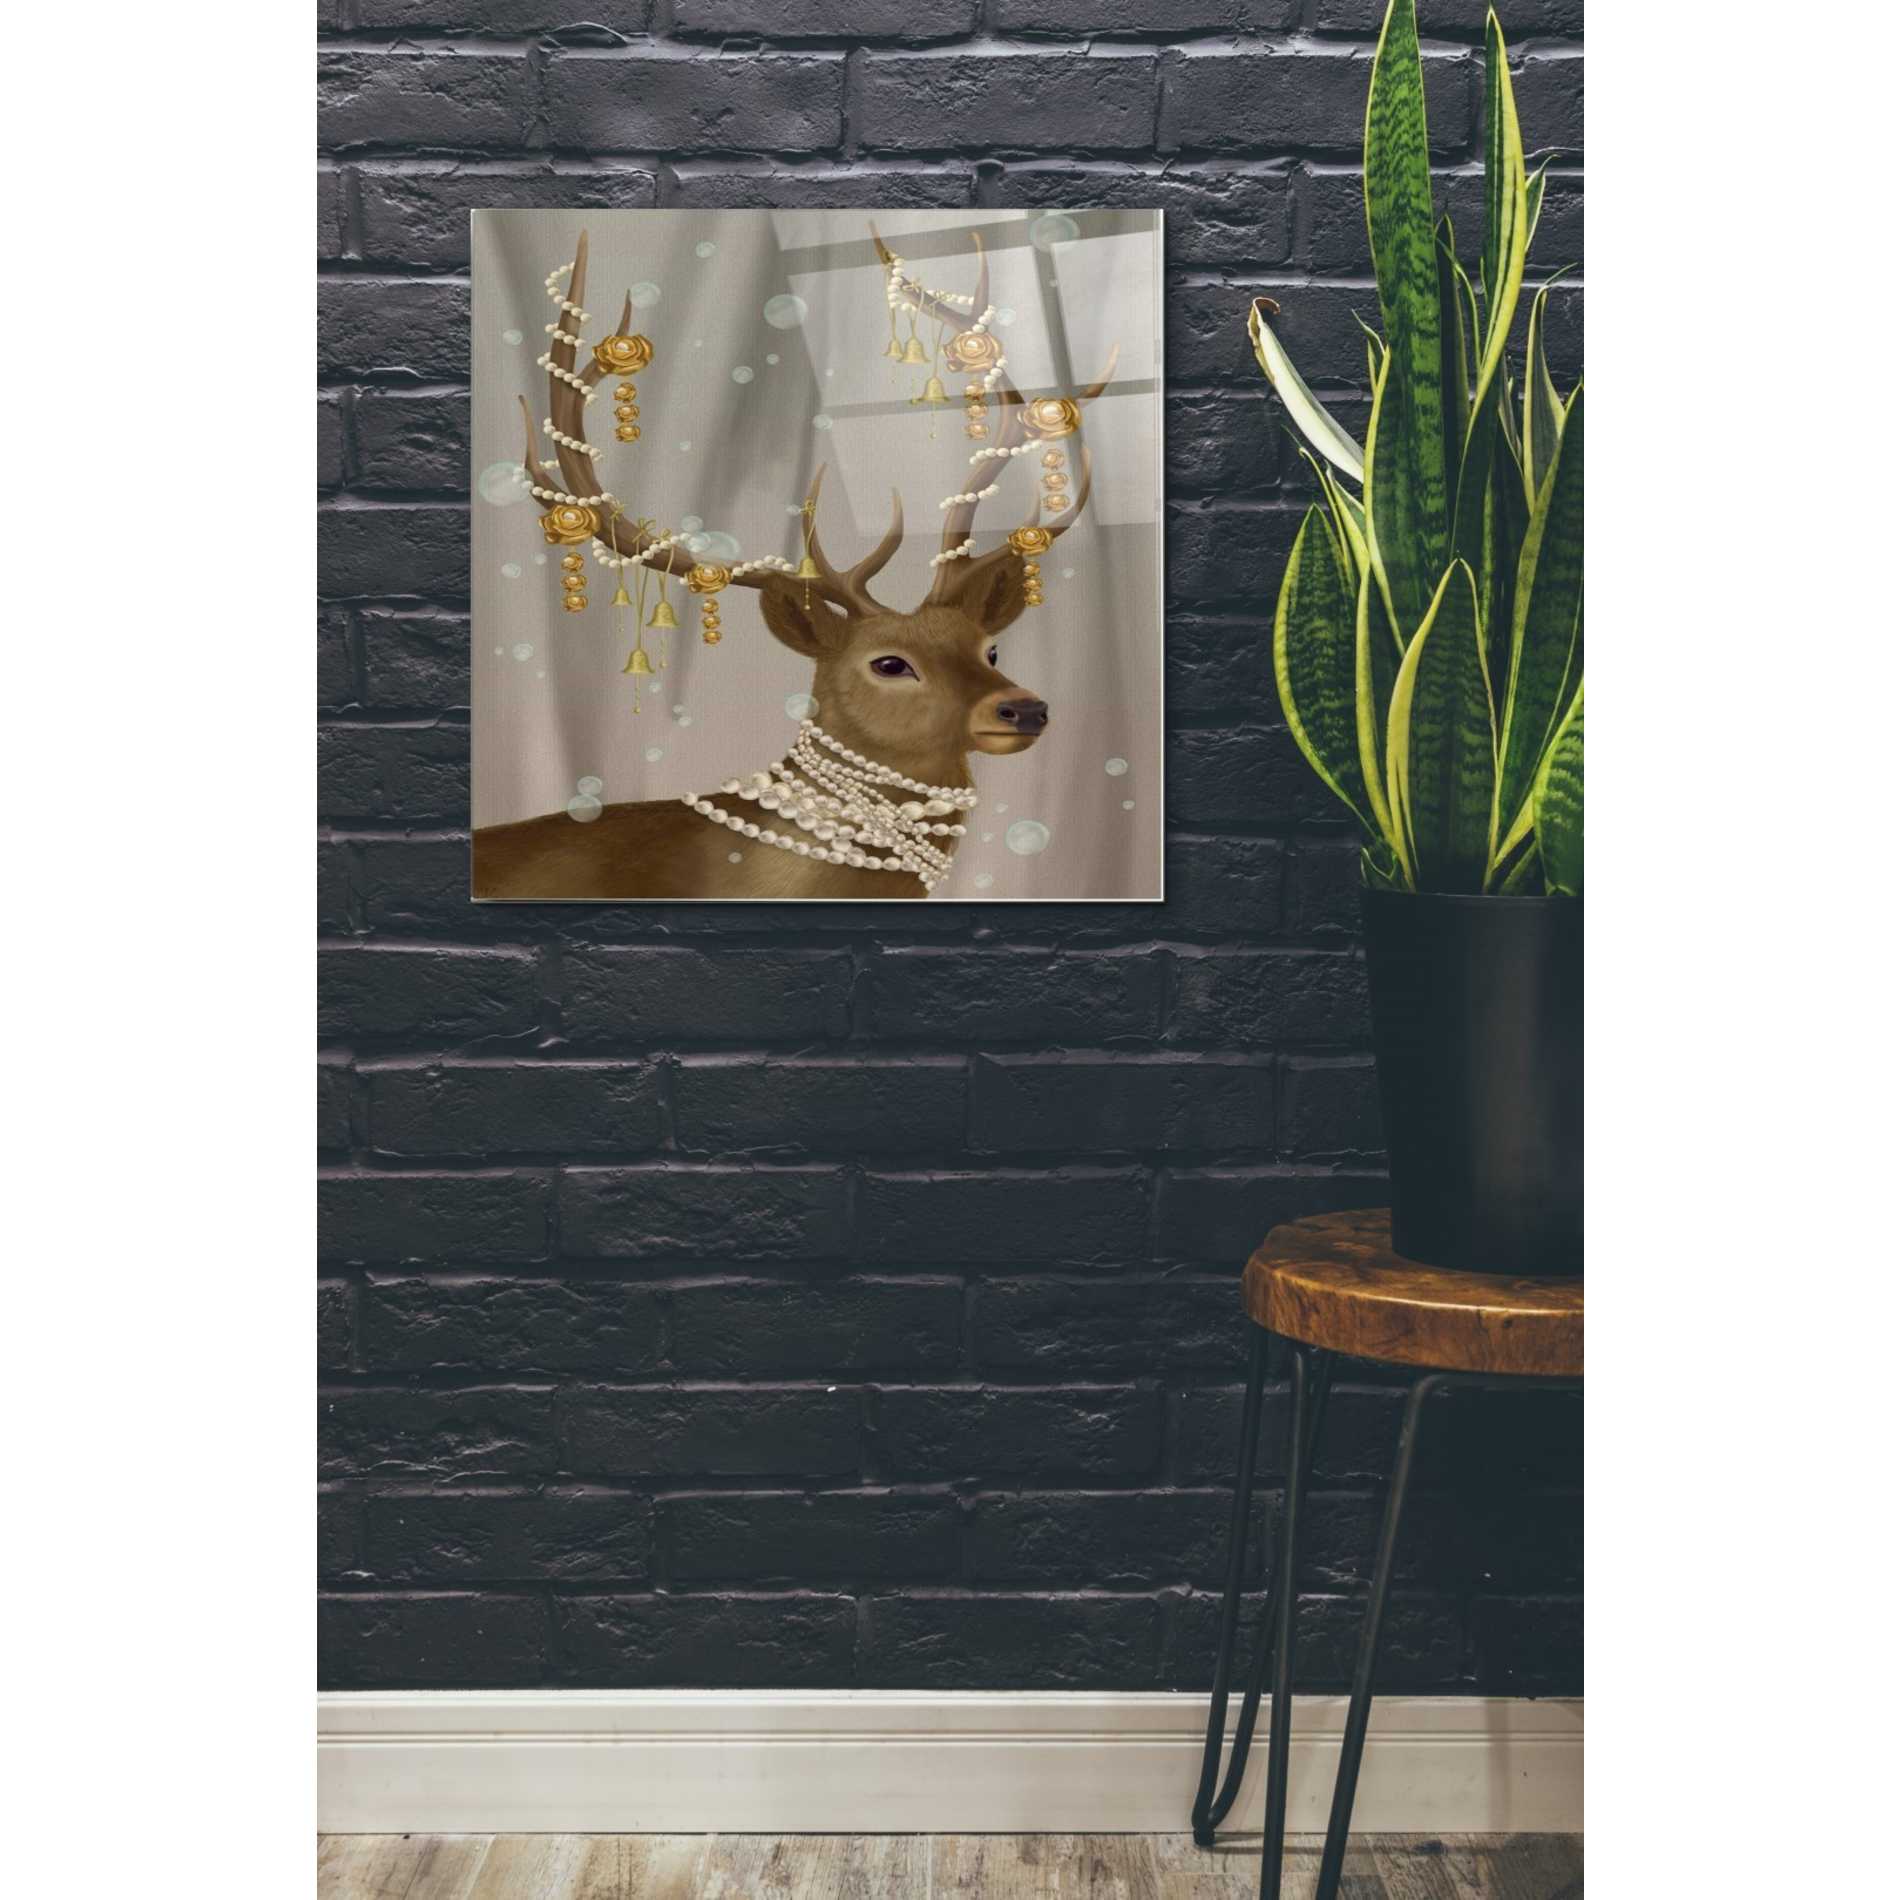 Epic Art 'Deer with Gold Bells' by Fab Funky Acrylic Glass Wall Art,24x24